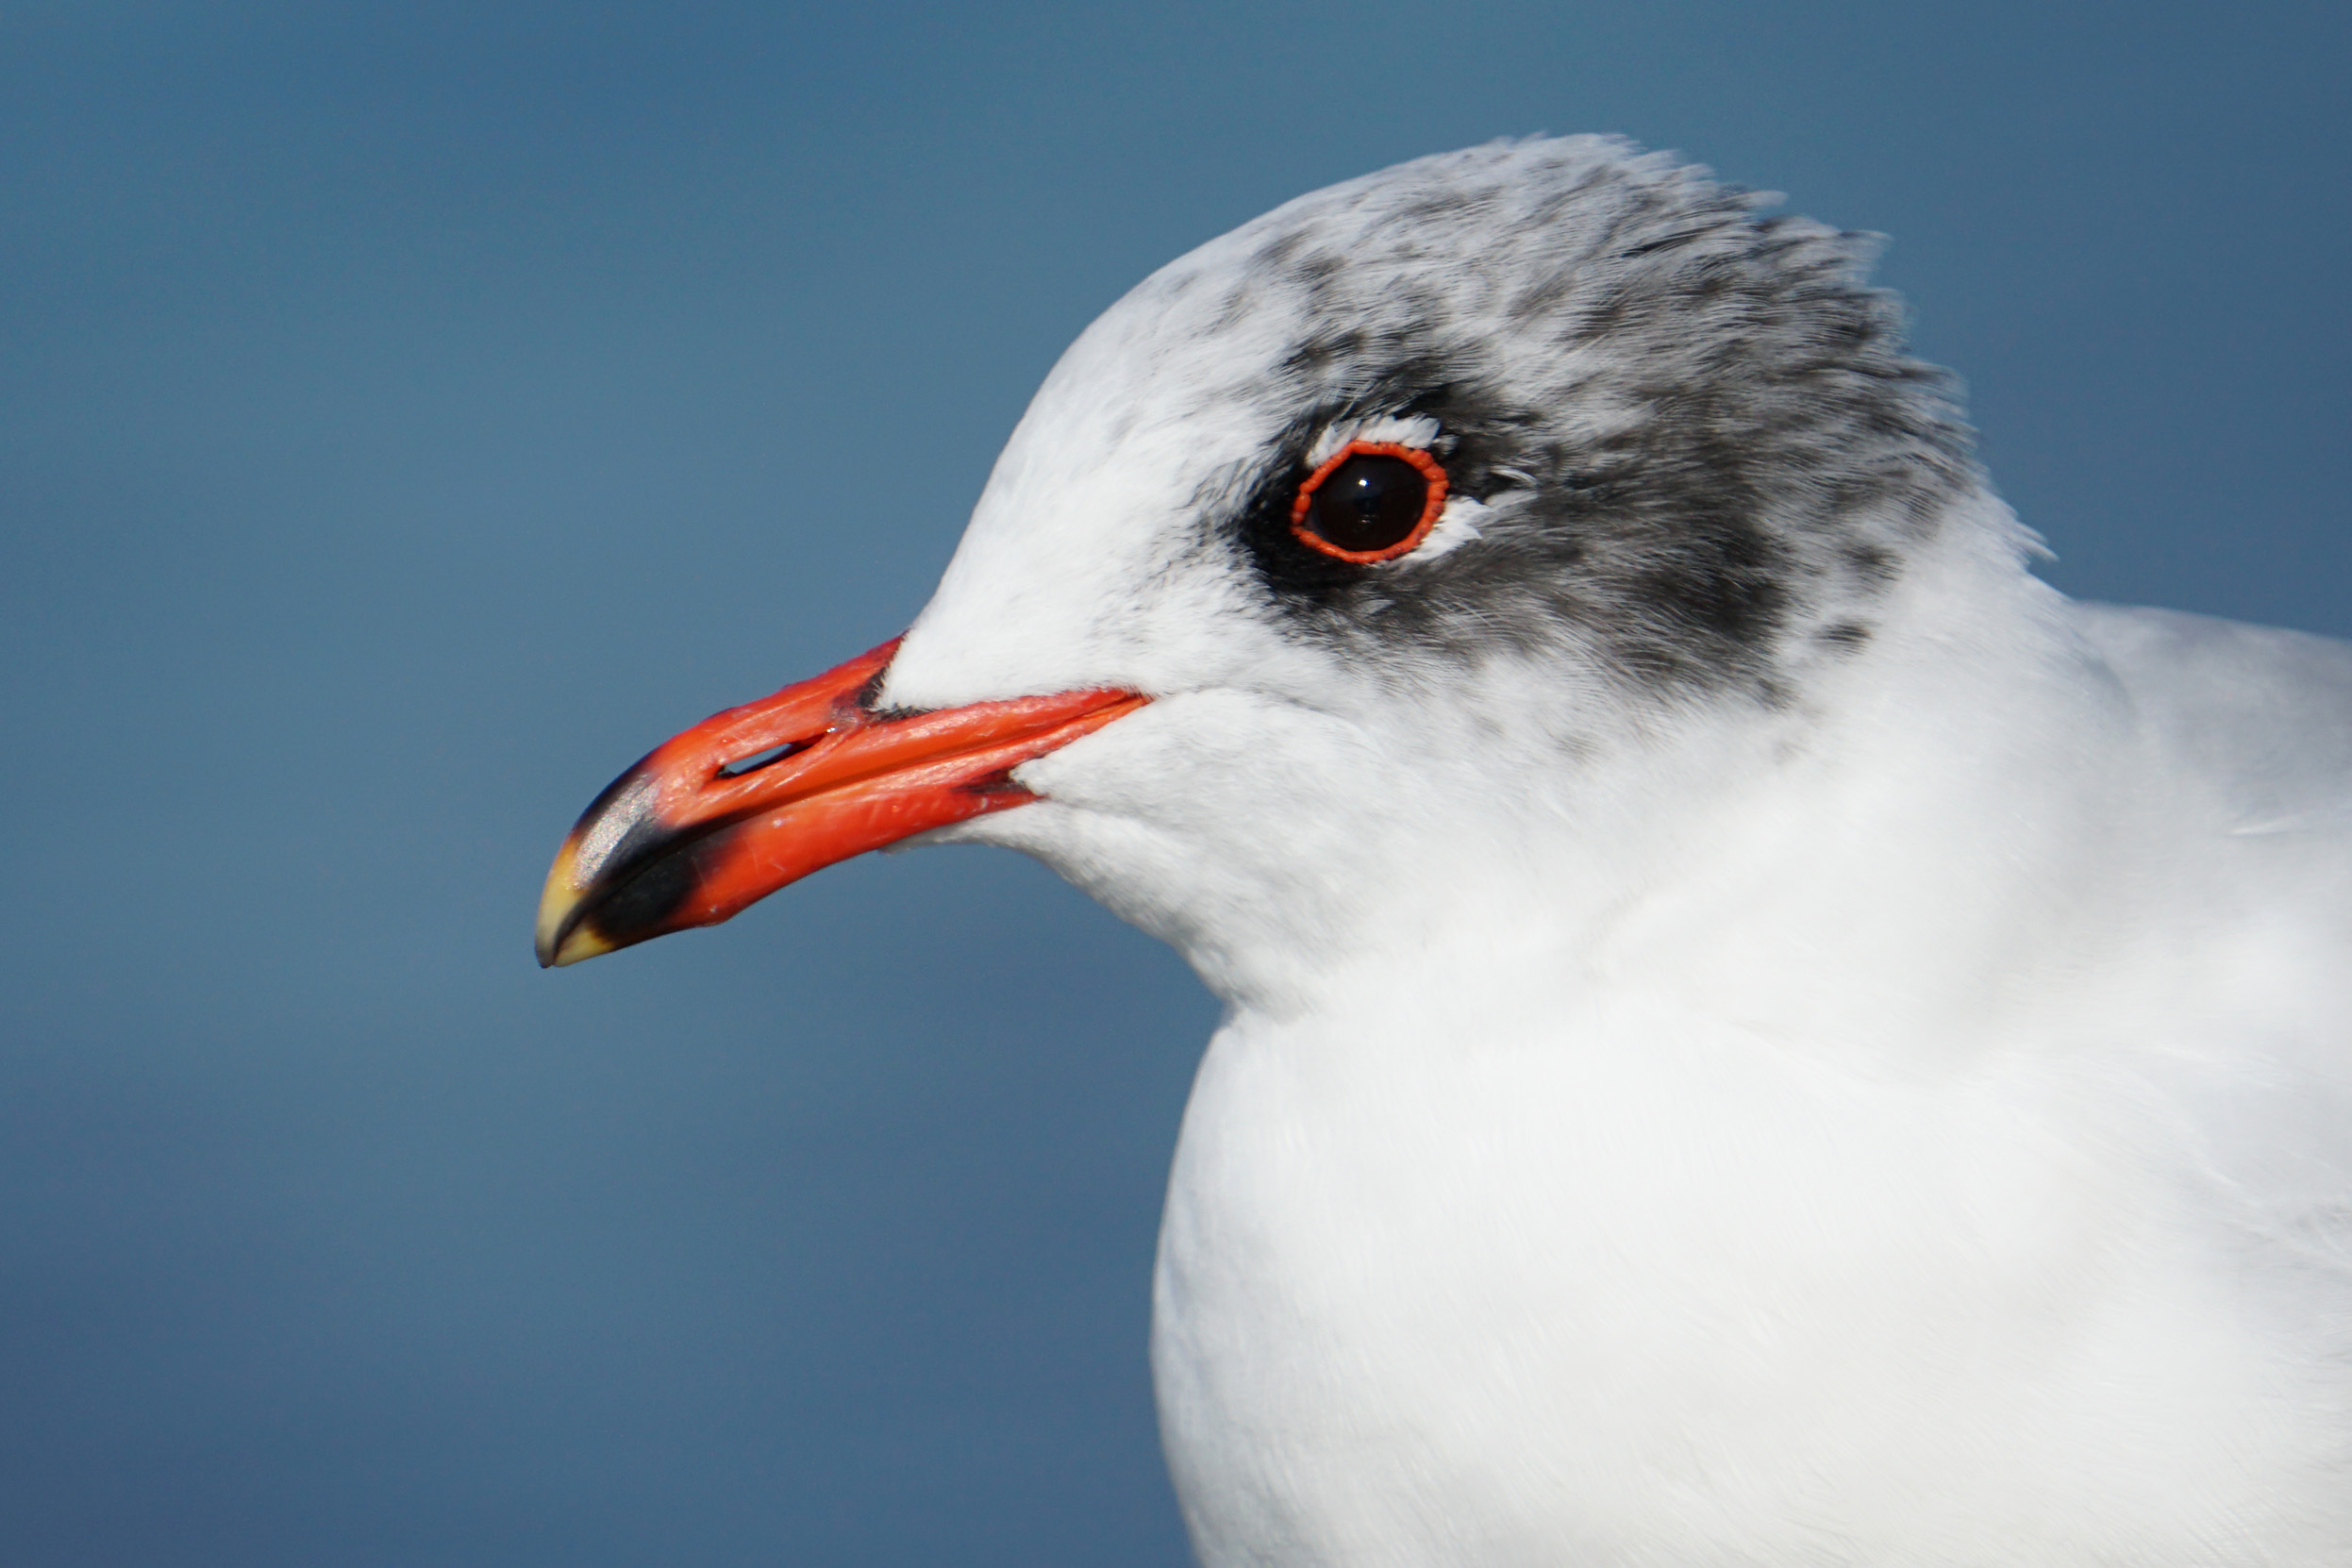 The close up view of a Mediterranean Gull in winter plumage head.